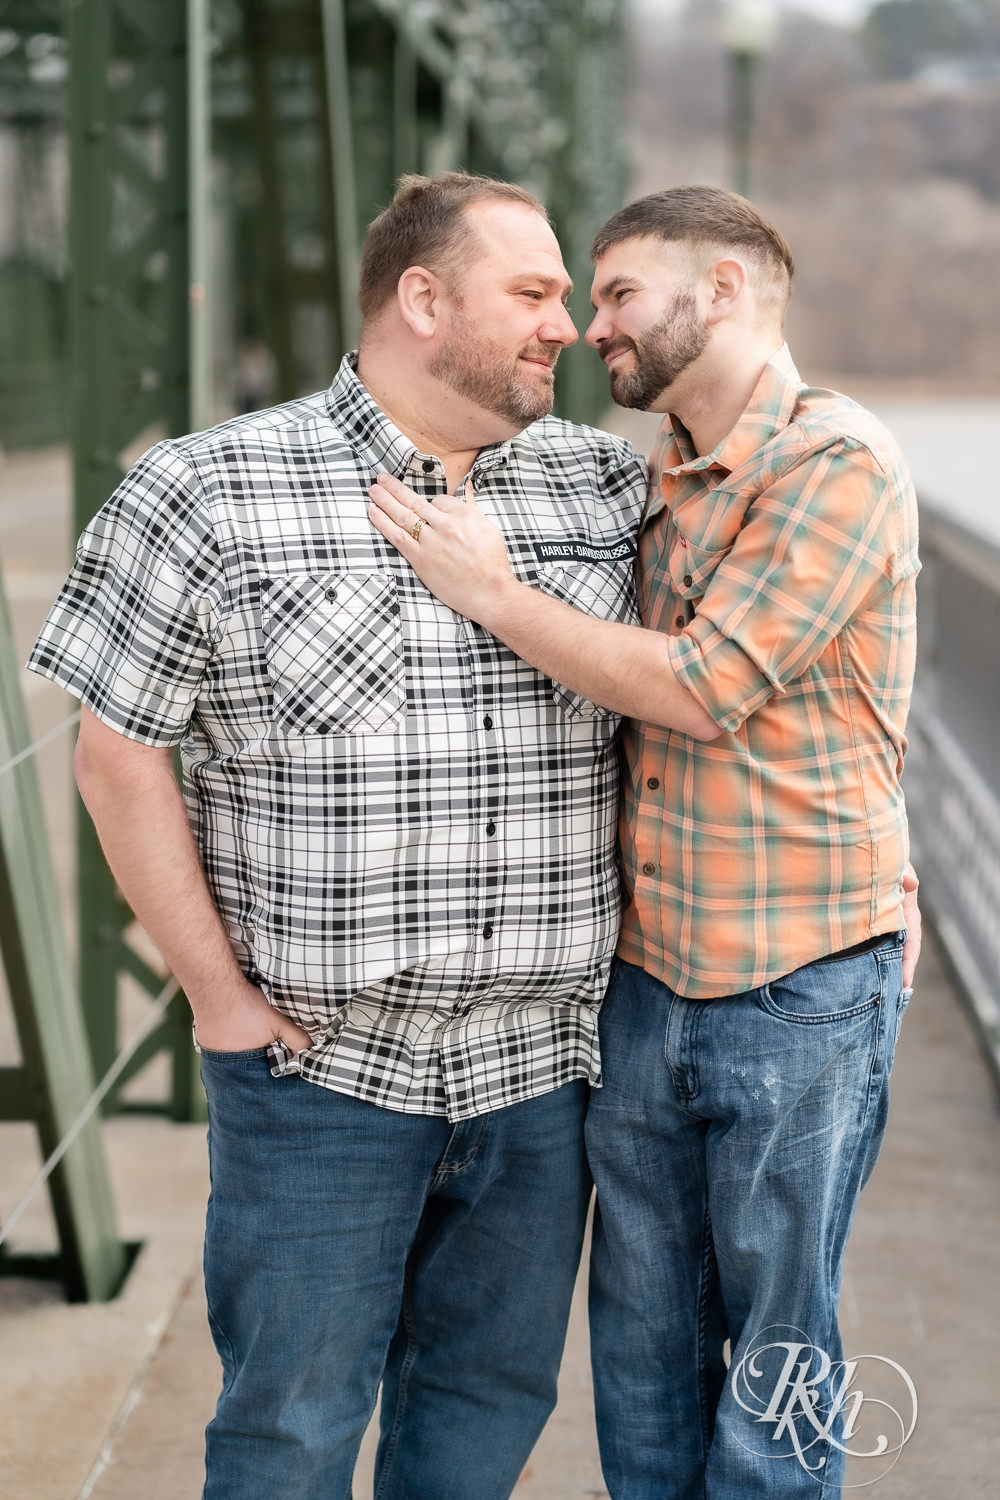 Two men in flannels and jeans kiss in on the bridge during engagement photography in Stillwater, Minnesota.